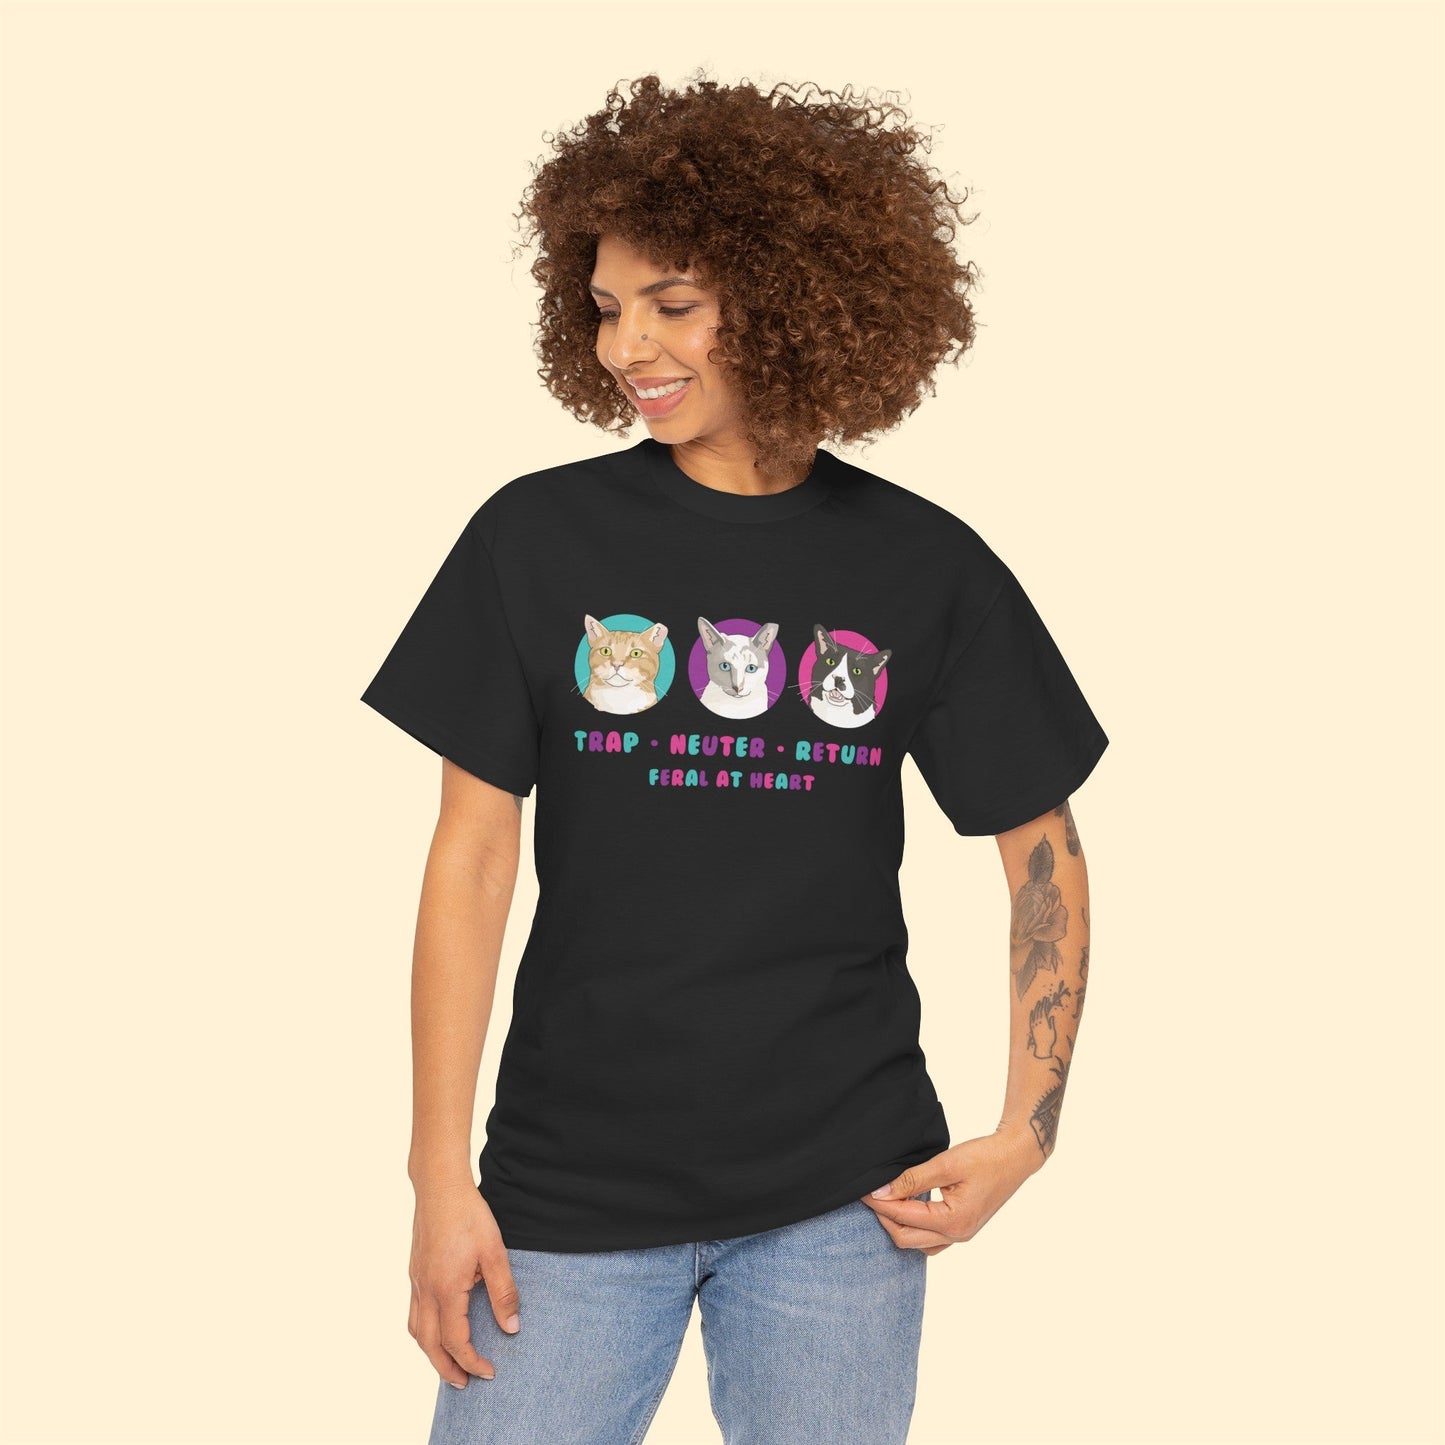 Colorful Kitties | FUNDRAISER for Feral At Heart | T-shirt - Detezi Designs-18572442529260046369